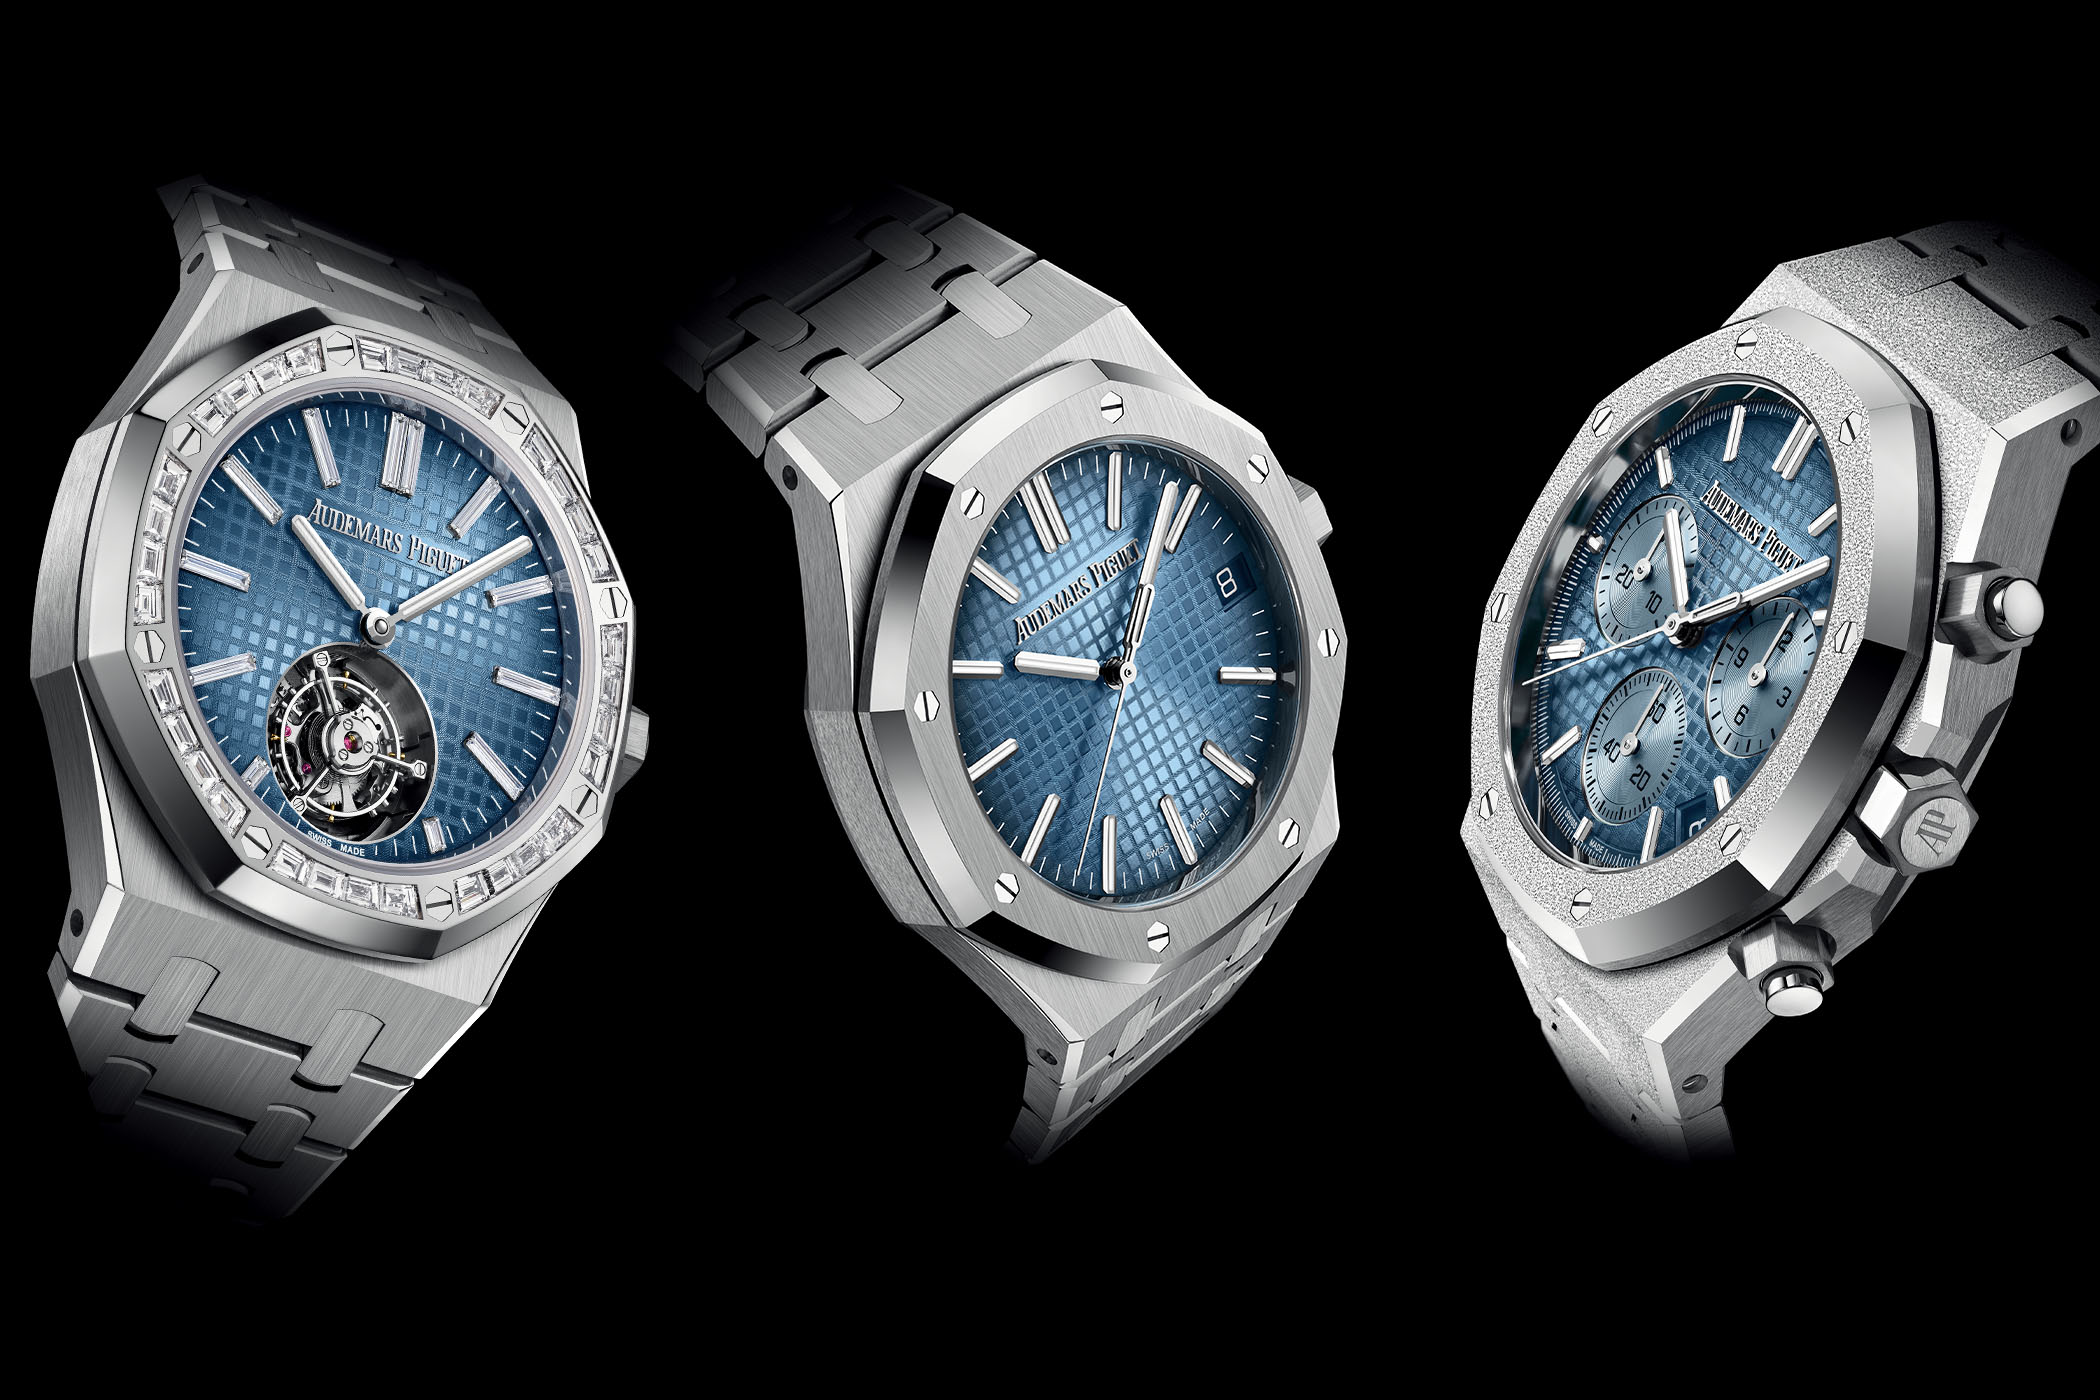 Three AP Royal Oaks In 41mm White Gold Cases With Smoked Light Blue Dials - Monochrome Watches